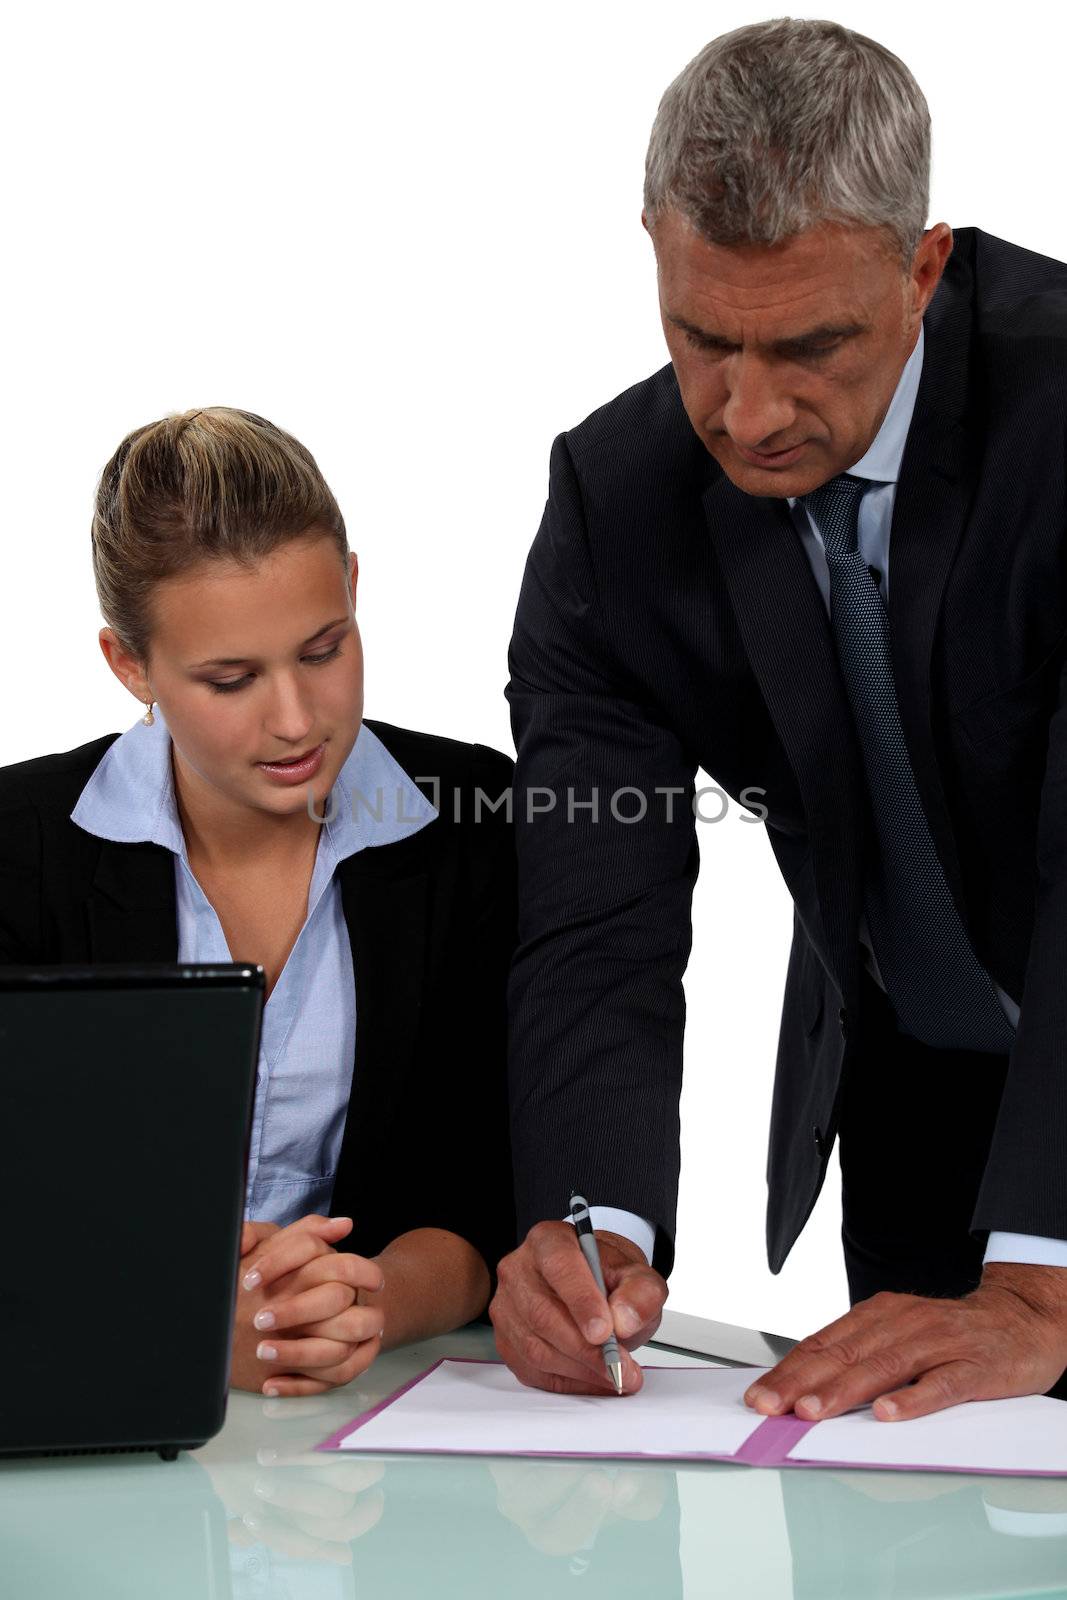 Boss looking through document with employee by phovoir